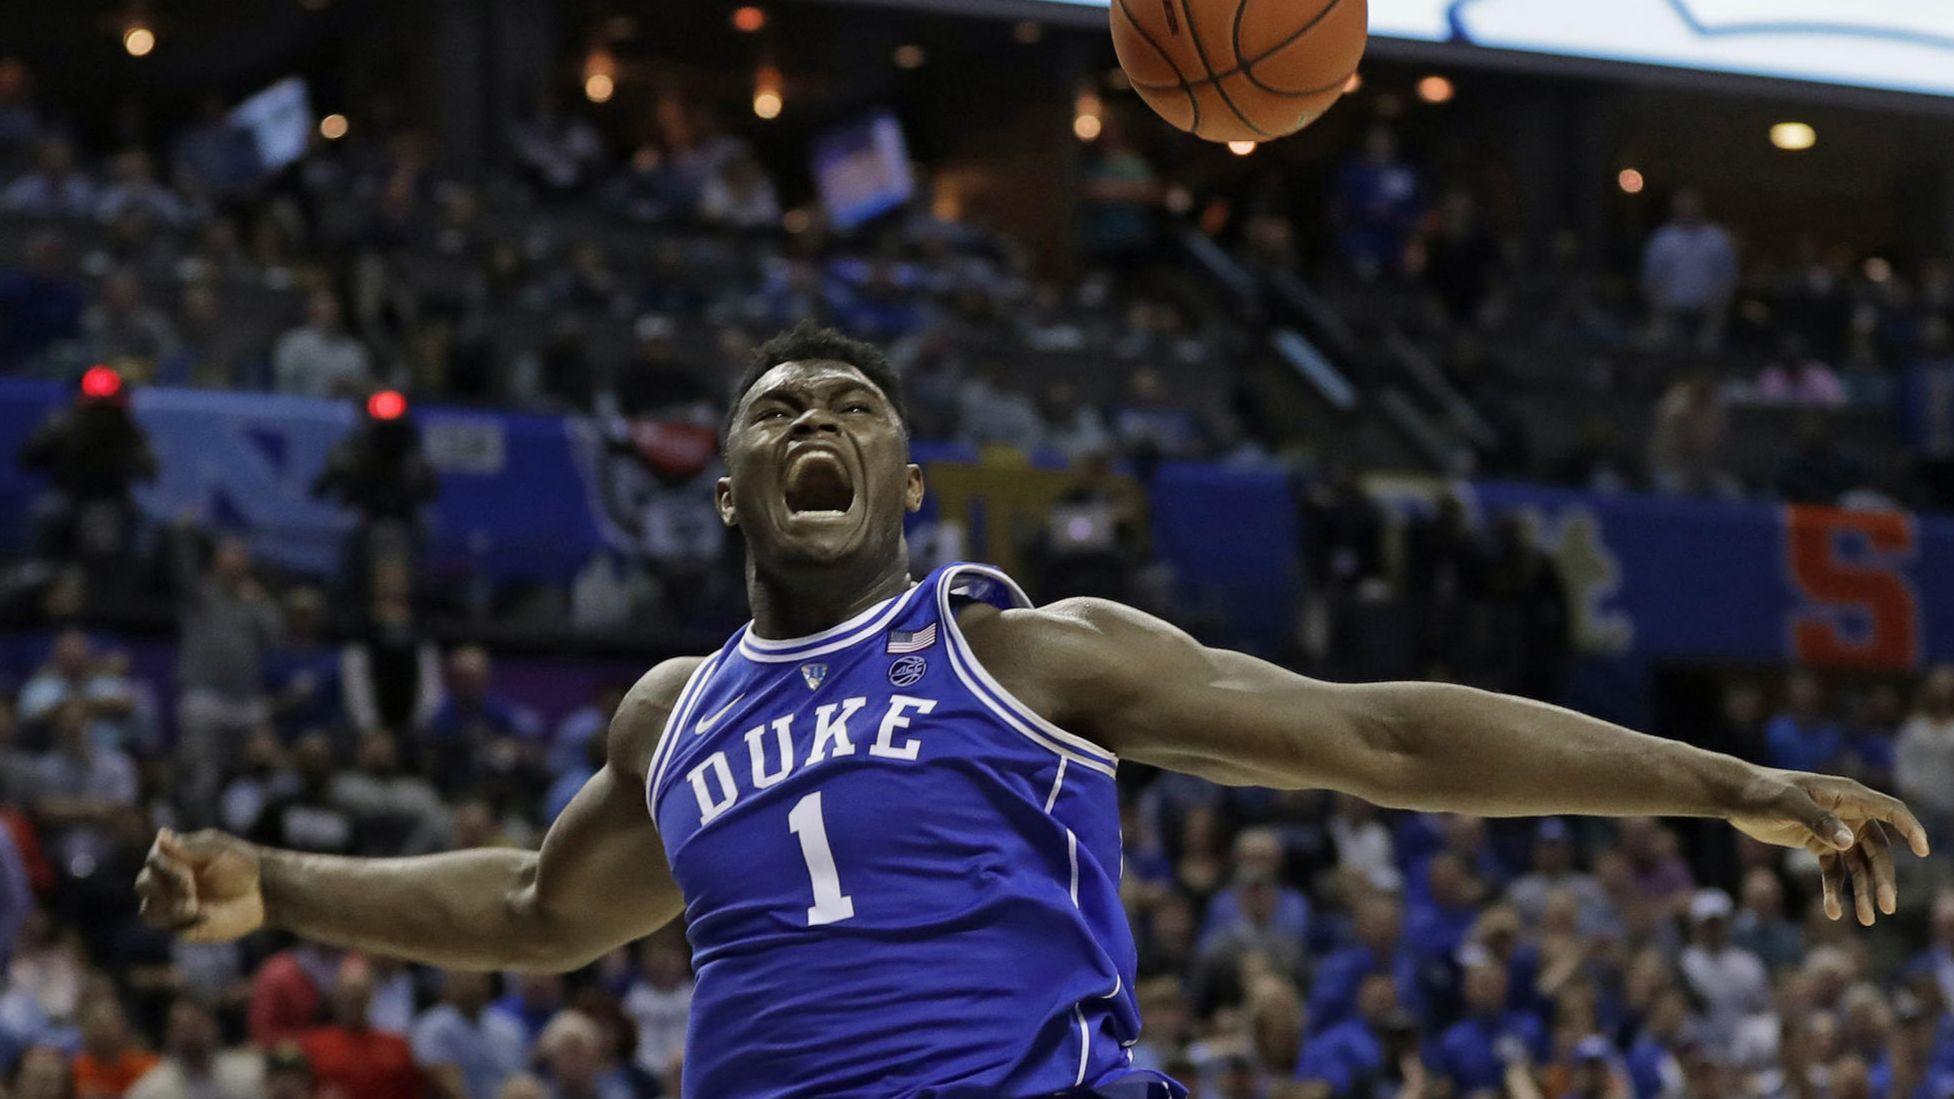 Zion Williamson declares for the NBA draft after 1 year at Duke - Chicago Tribune1954 x 1099